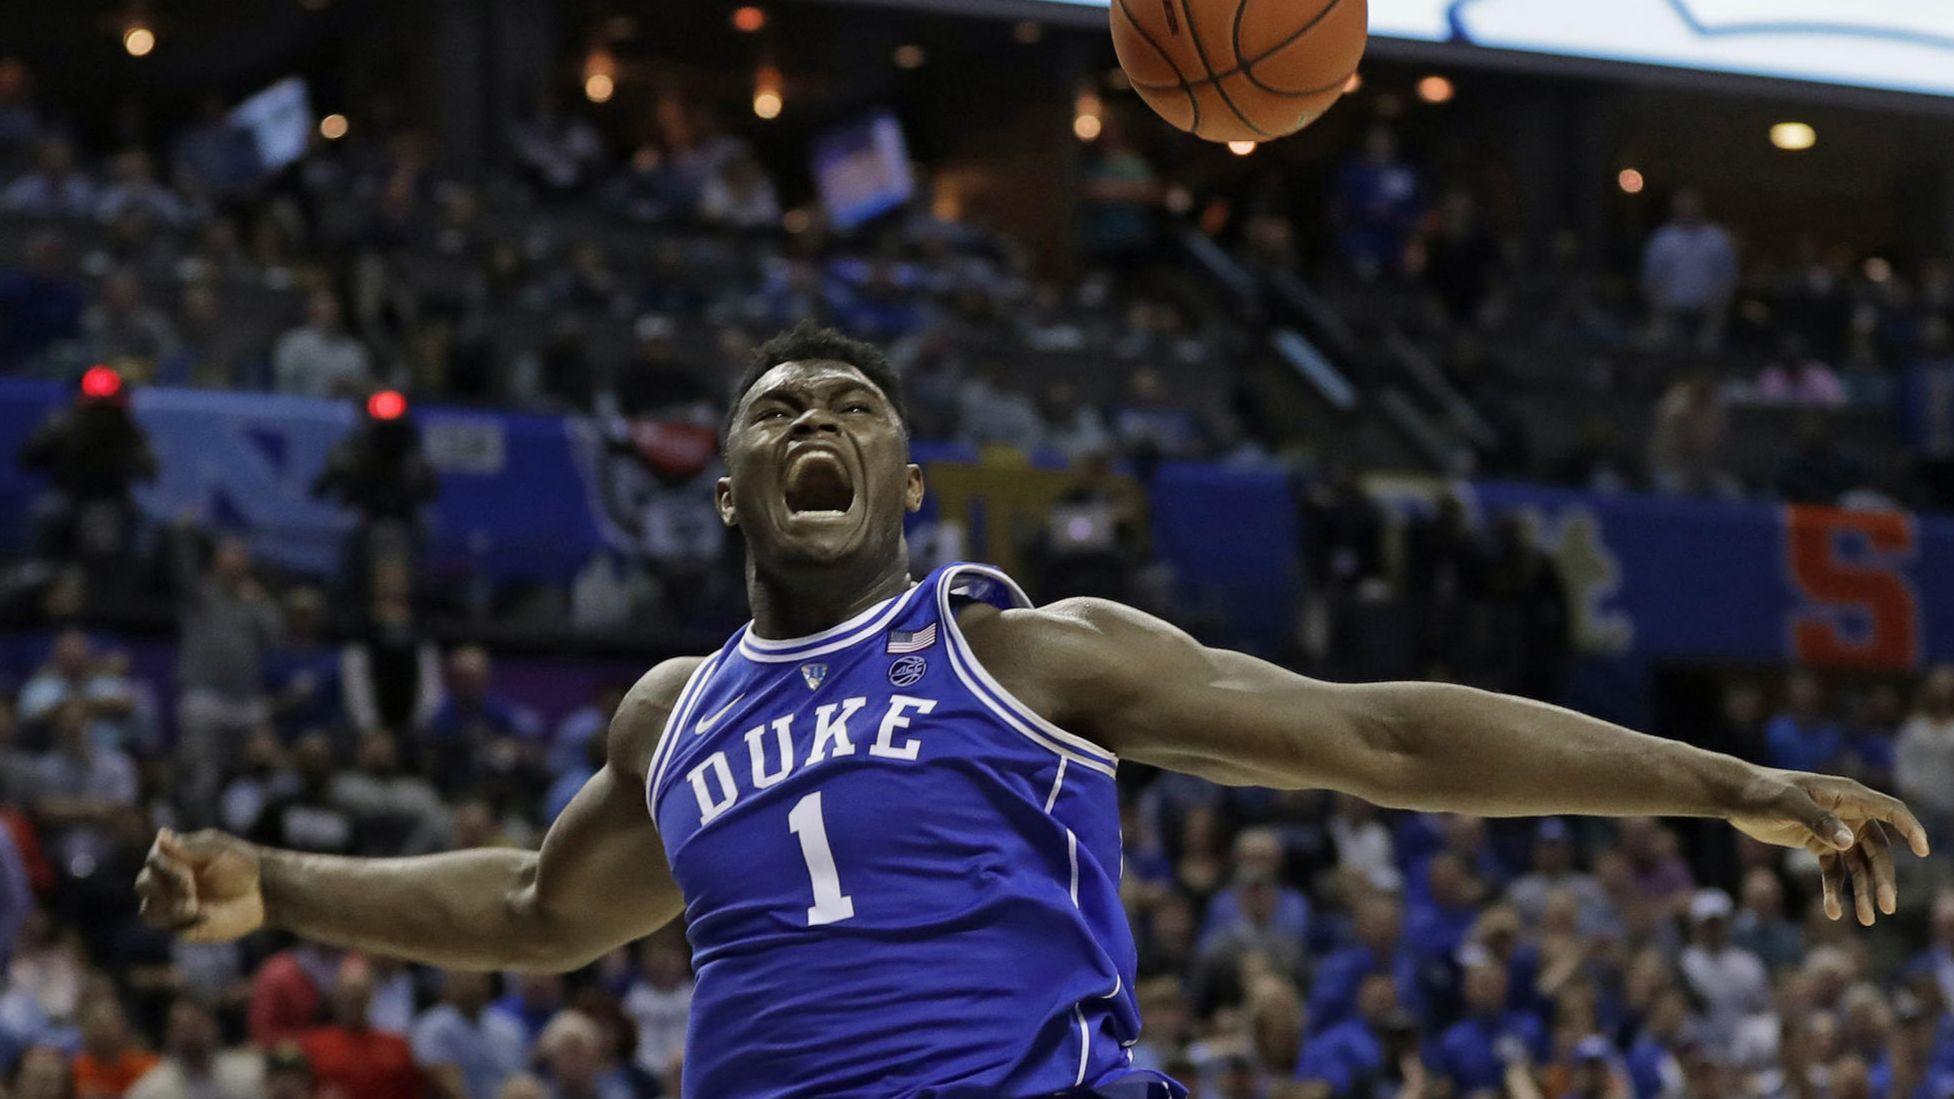 Zion Williamson declares for the NBA draft after 1 year at Duke - Chicago Tribune1954 x 1099